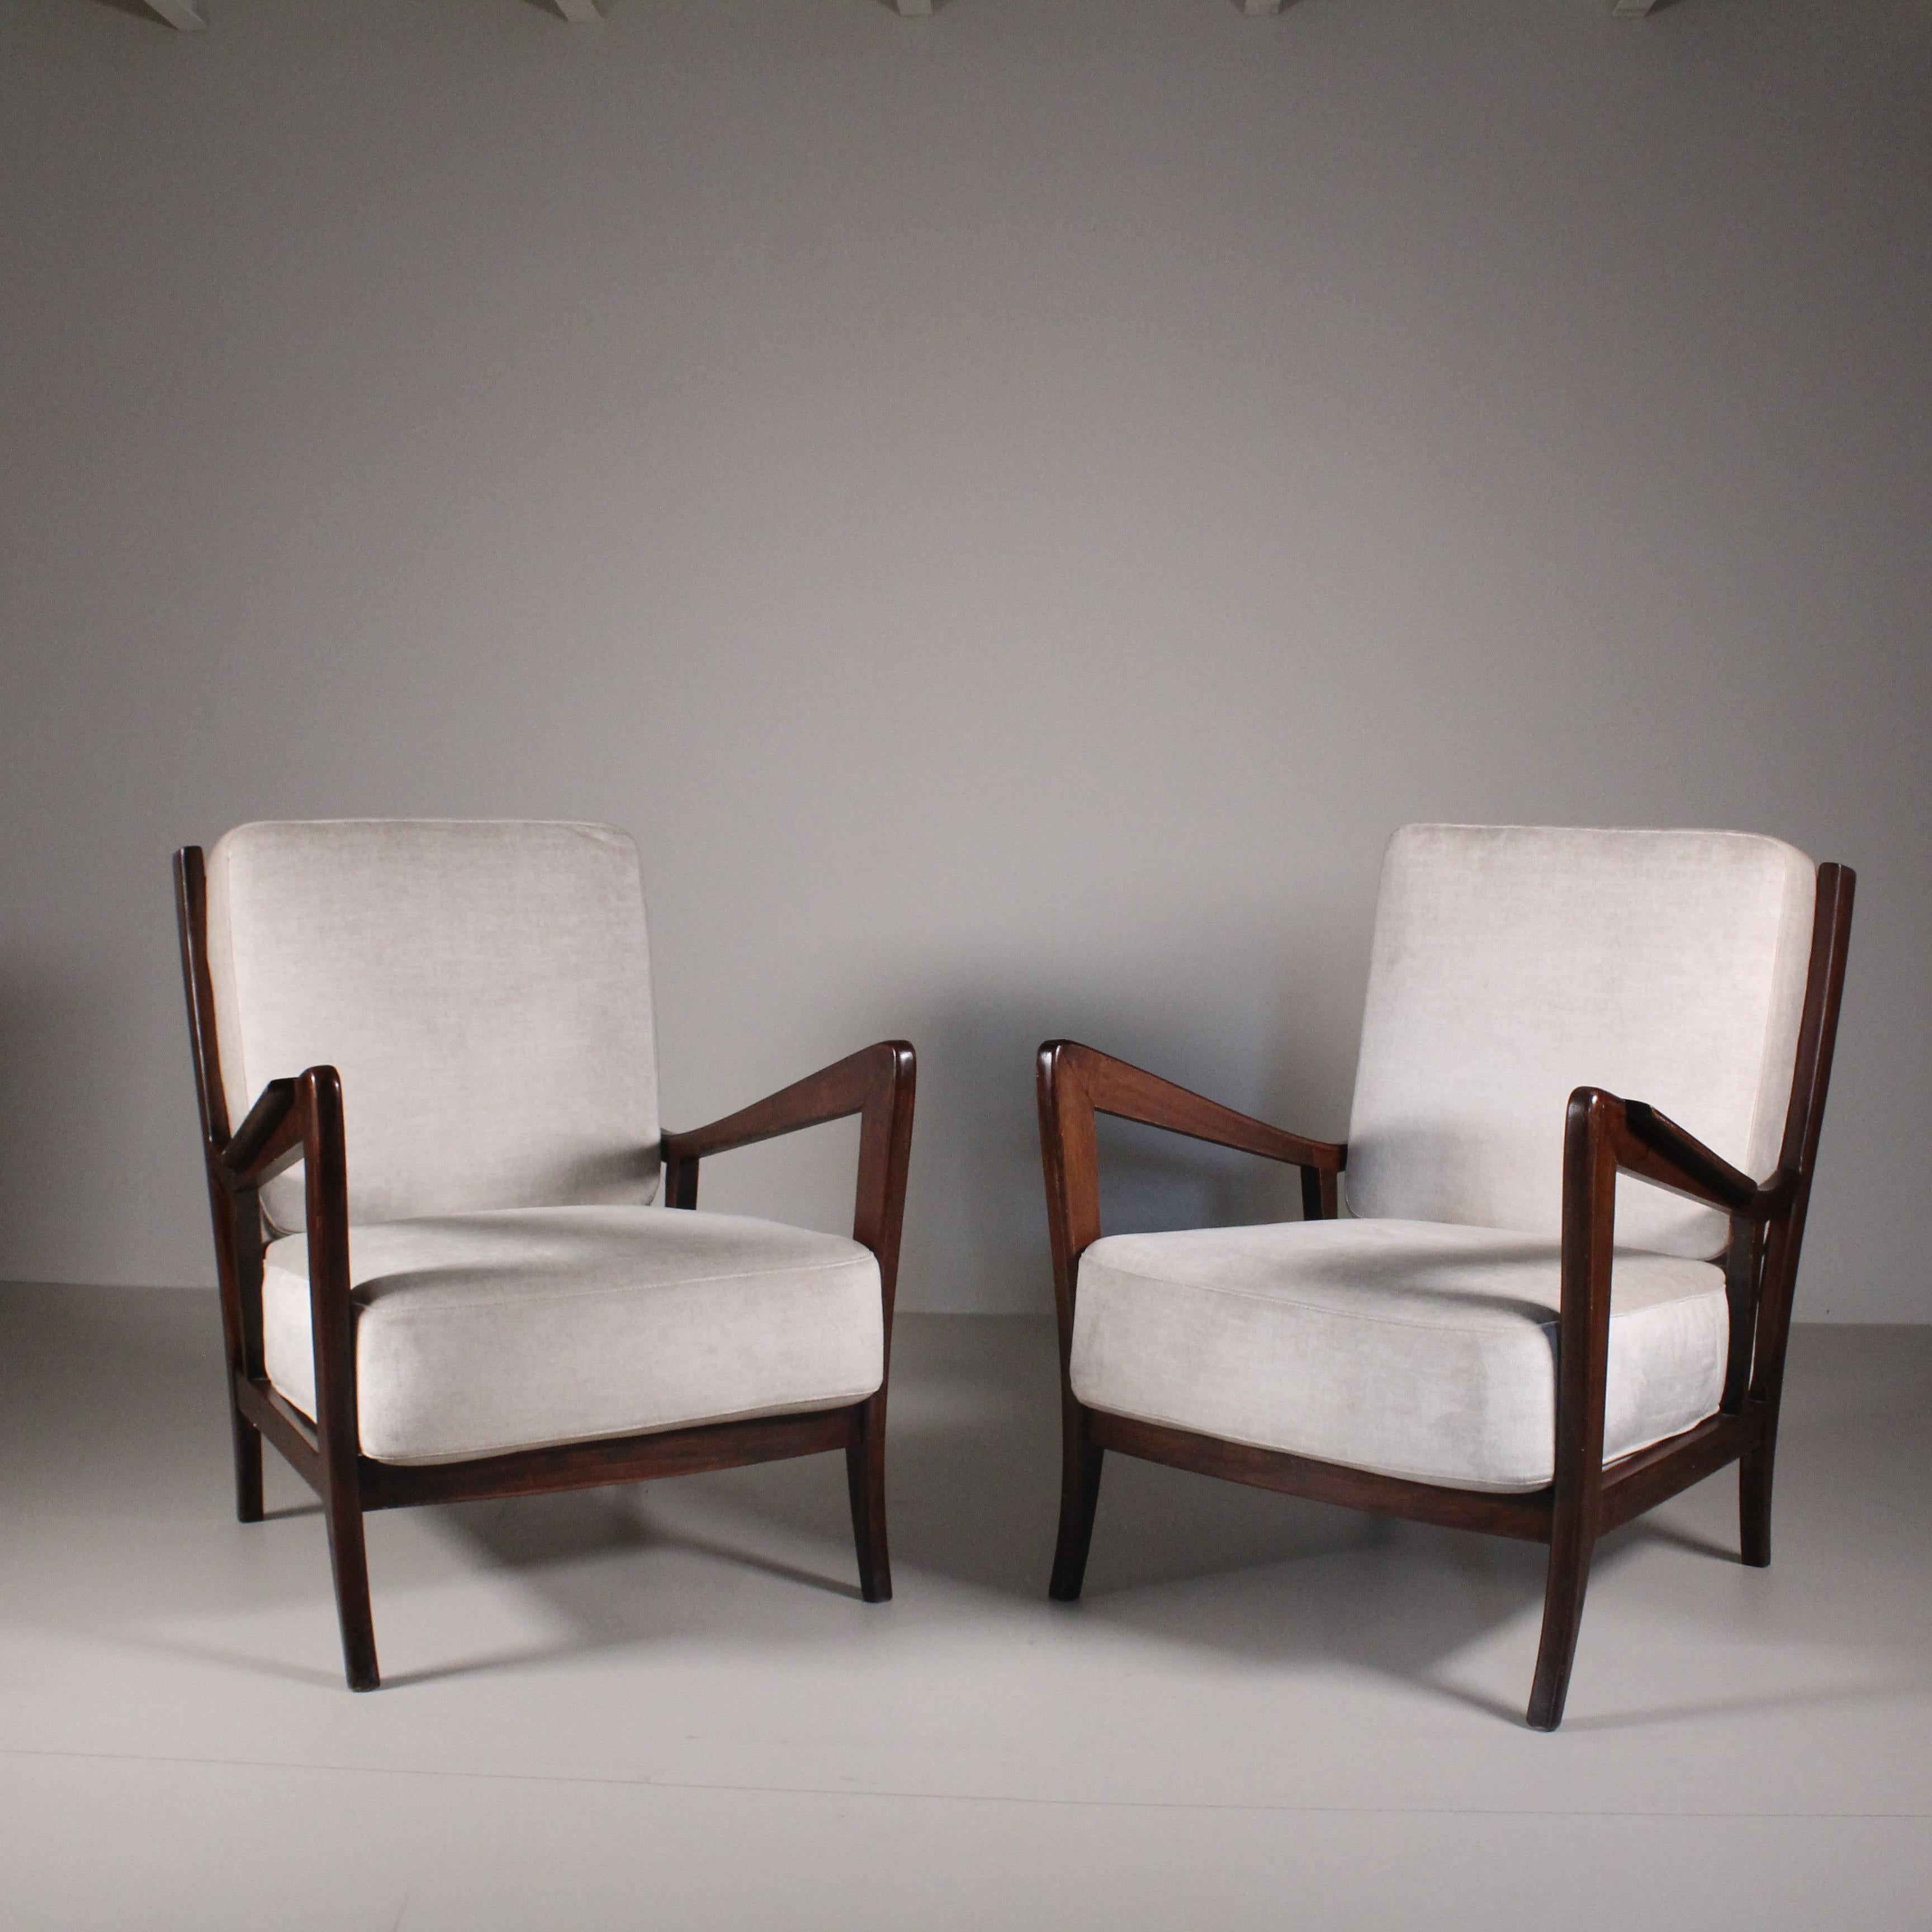 Pair of 1950s armchairs in a style clearly inspired by Gio Ponti, with a classic and typical mid-century style. The armchairs have been restored with. new upholstery and repainting of the wooden frame to bring them back to their original splendor.